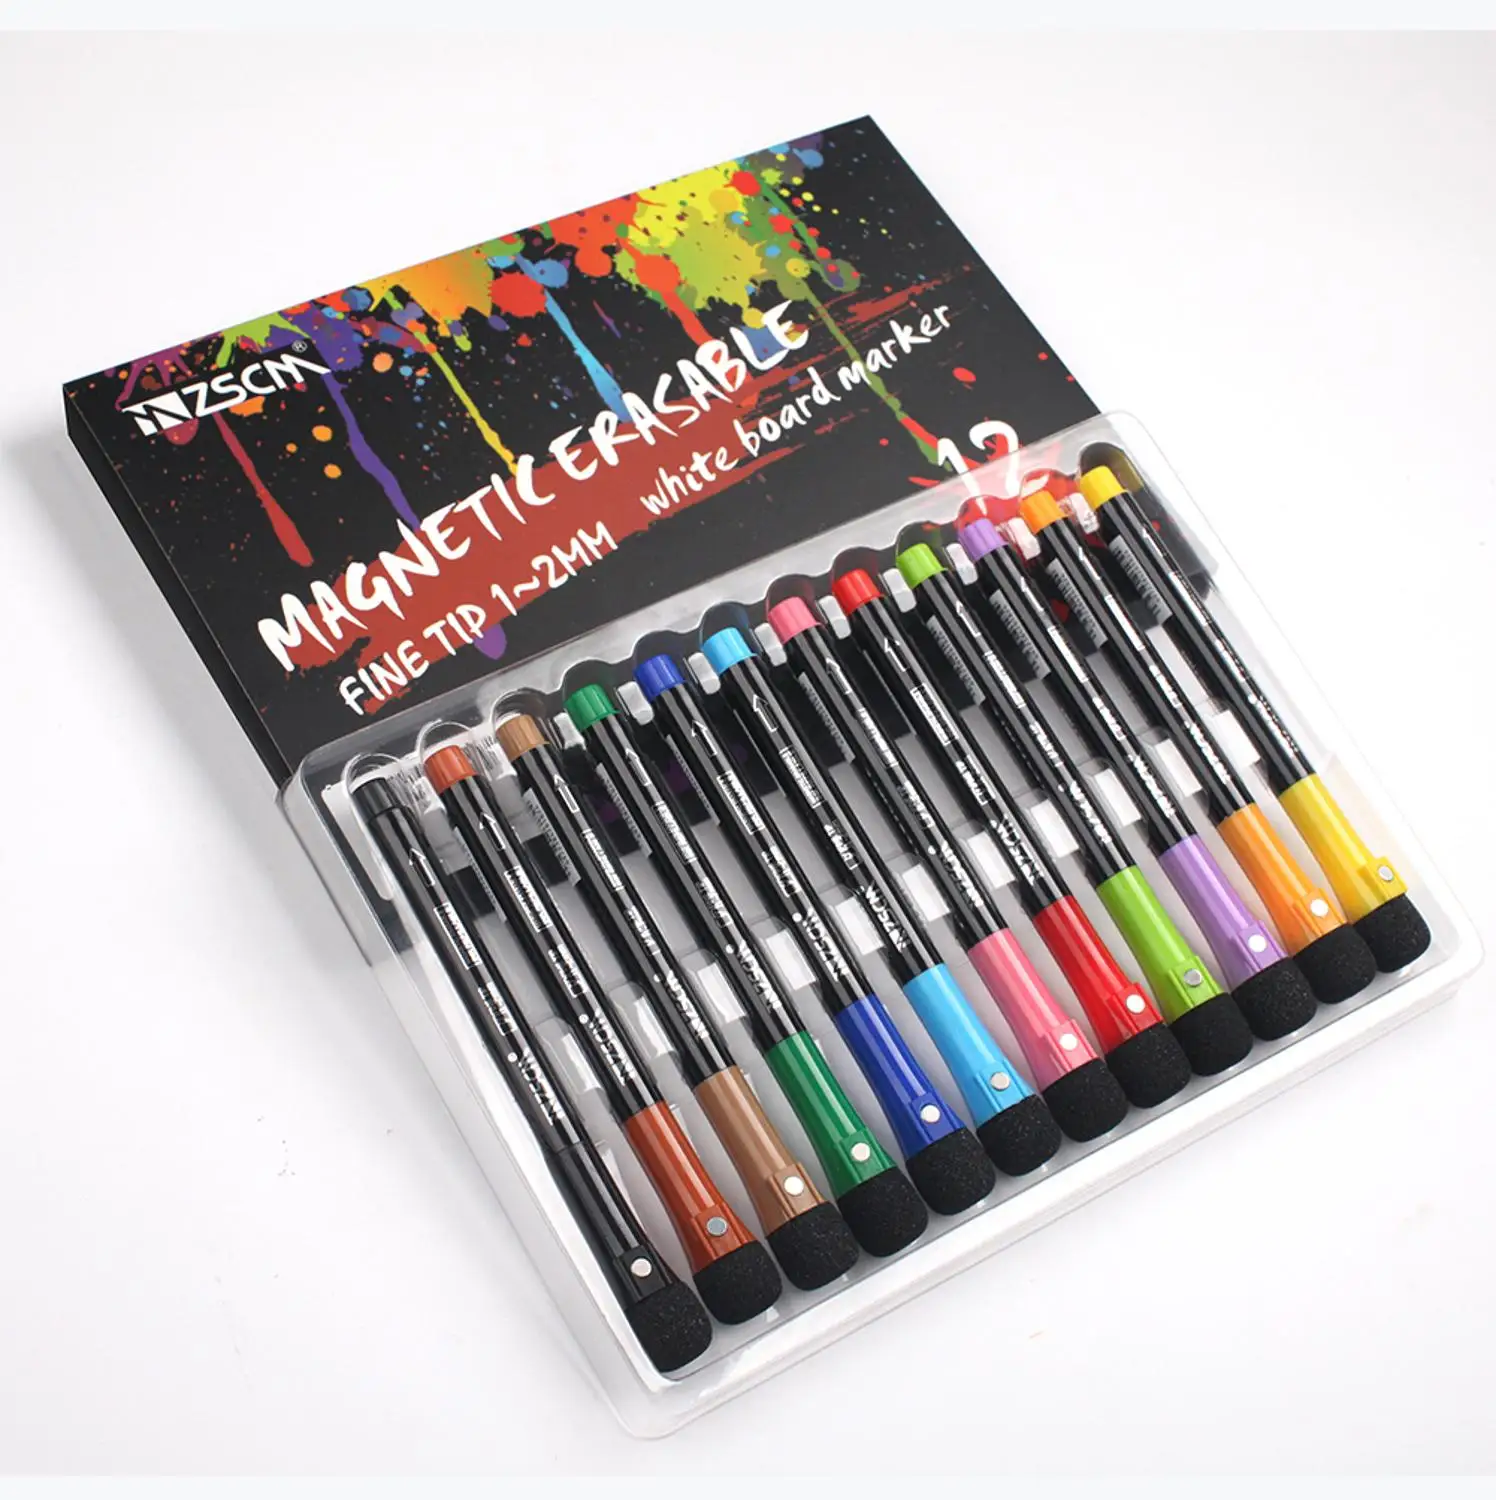 8 Colors Magnetic Dry Erase Markers Fine Tip Magnetic Erasable